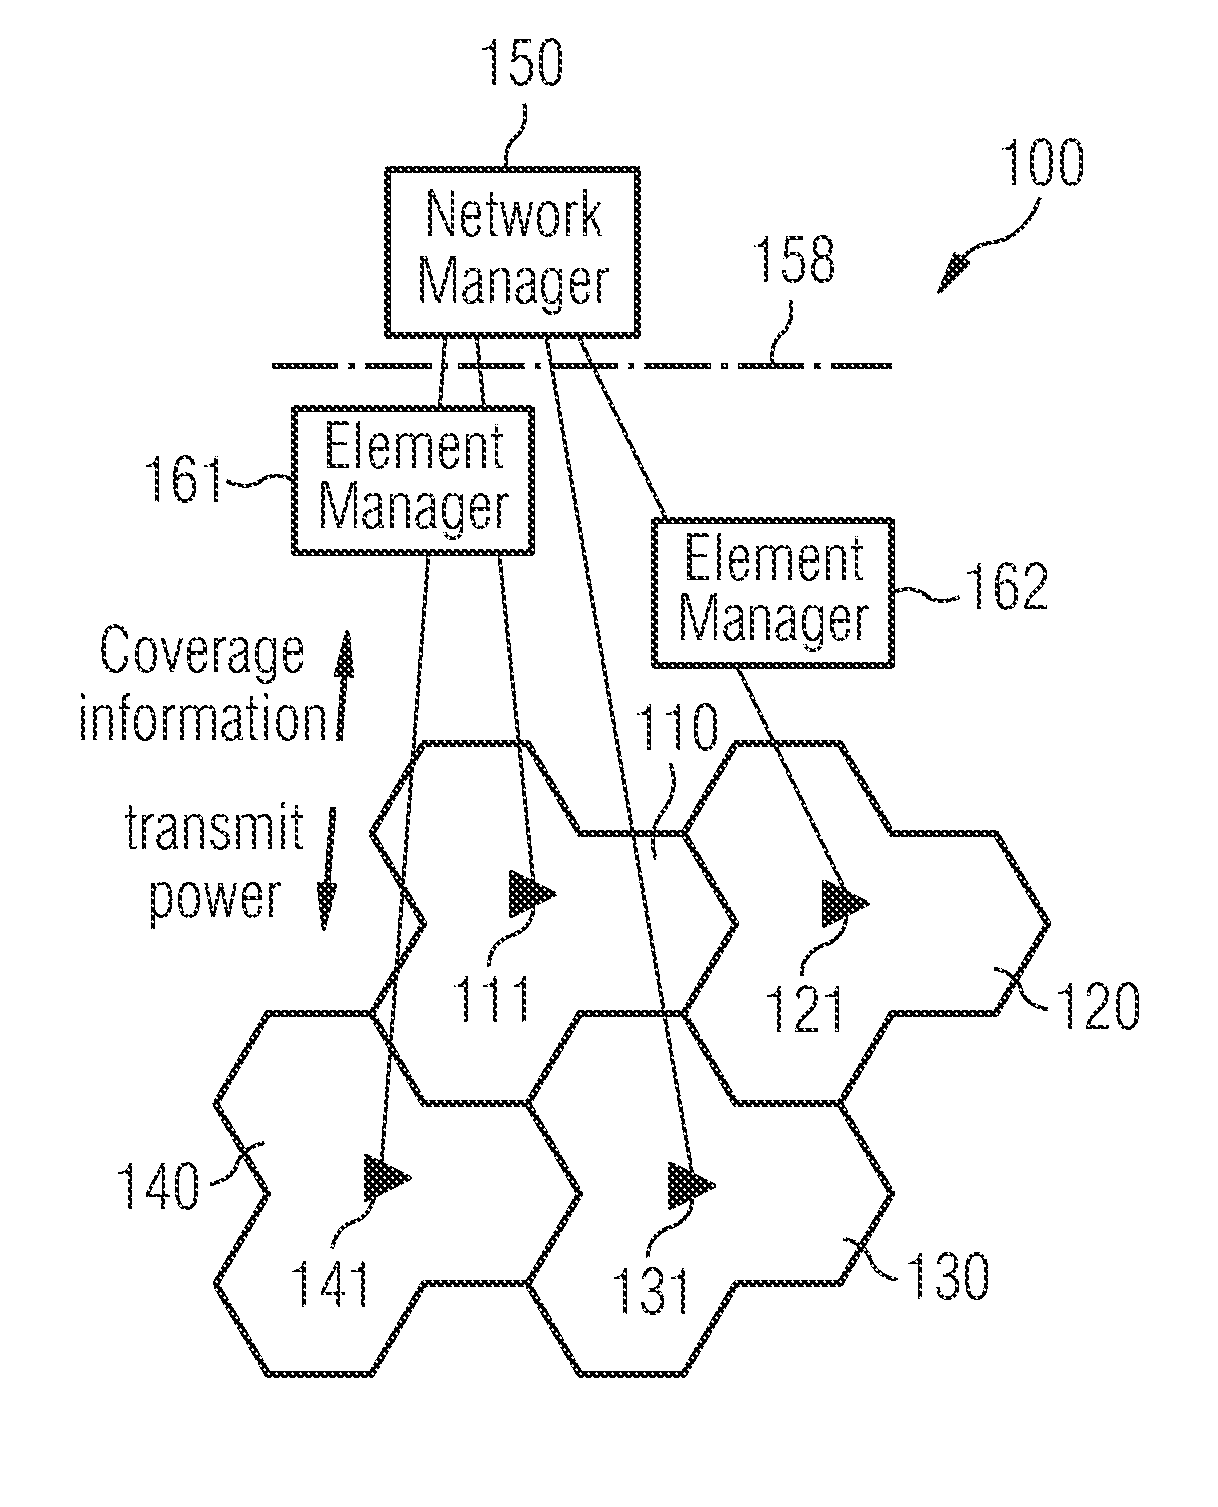 Determining an Optimized Configuration of a Telecommunication Network